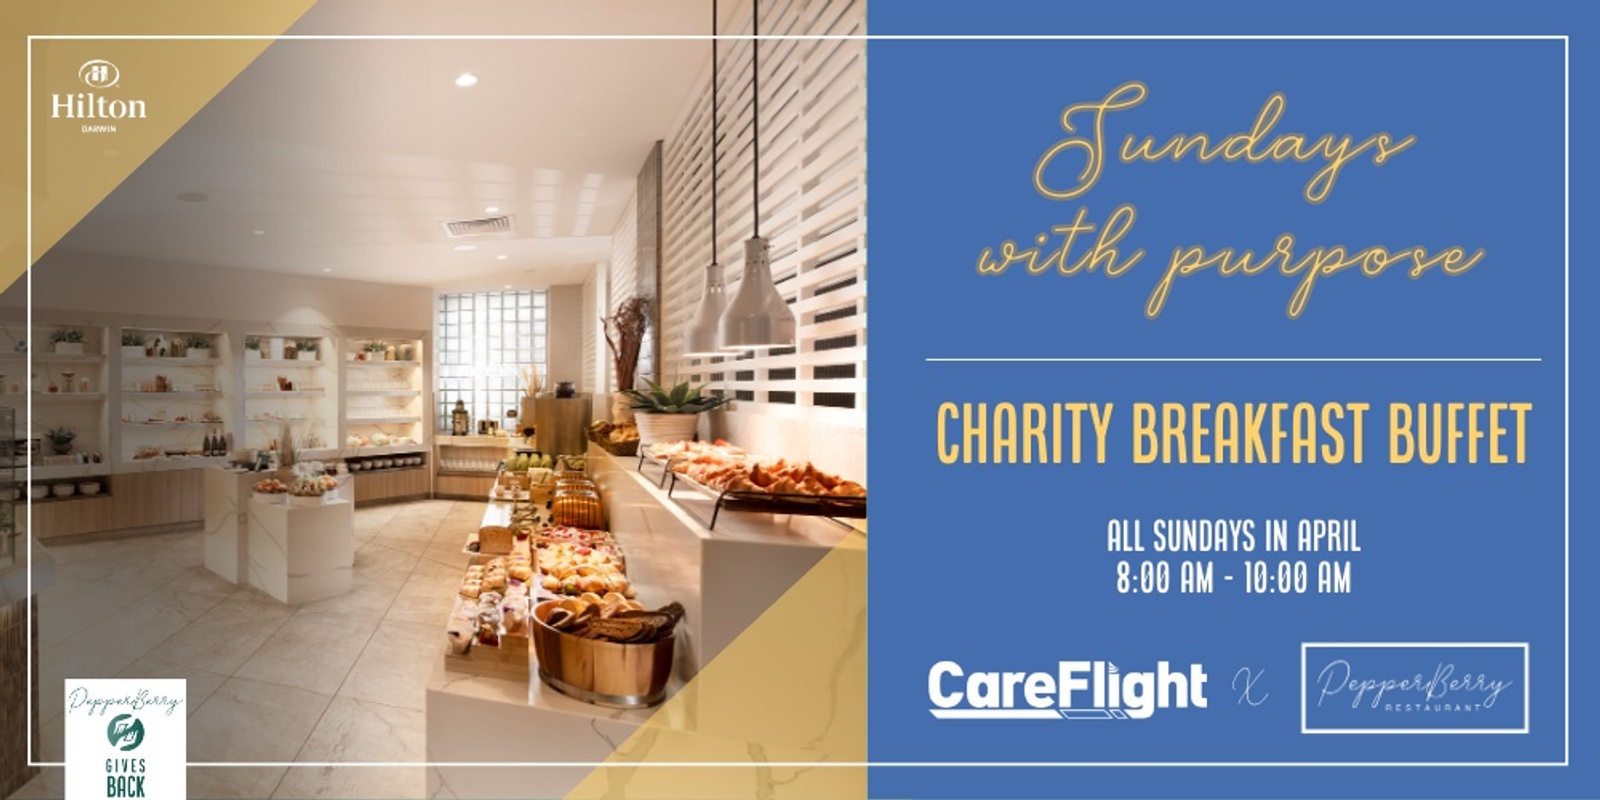 Banner image for Sundays with Purpose: PepperBerry's CareFlight Charity Breakfast Buffet